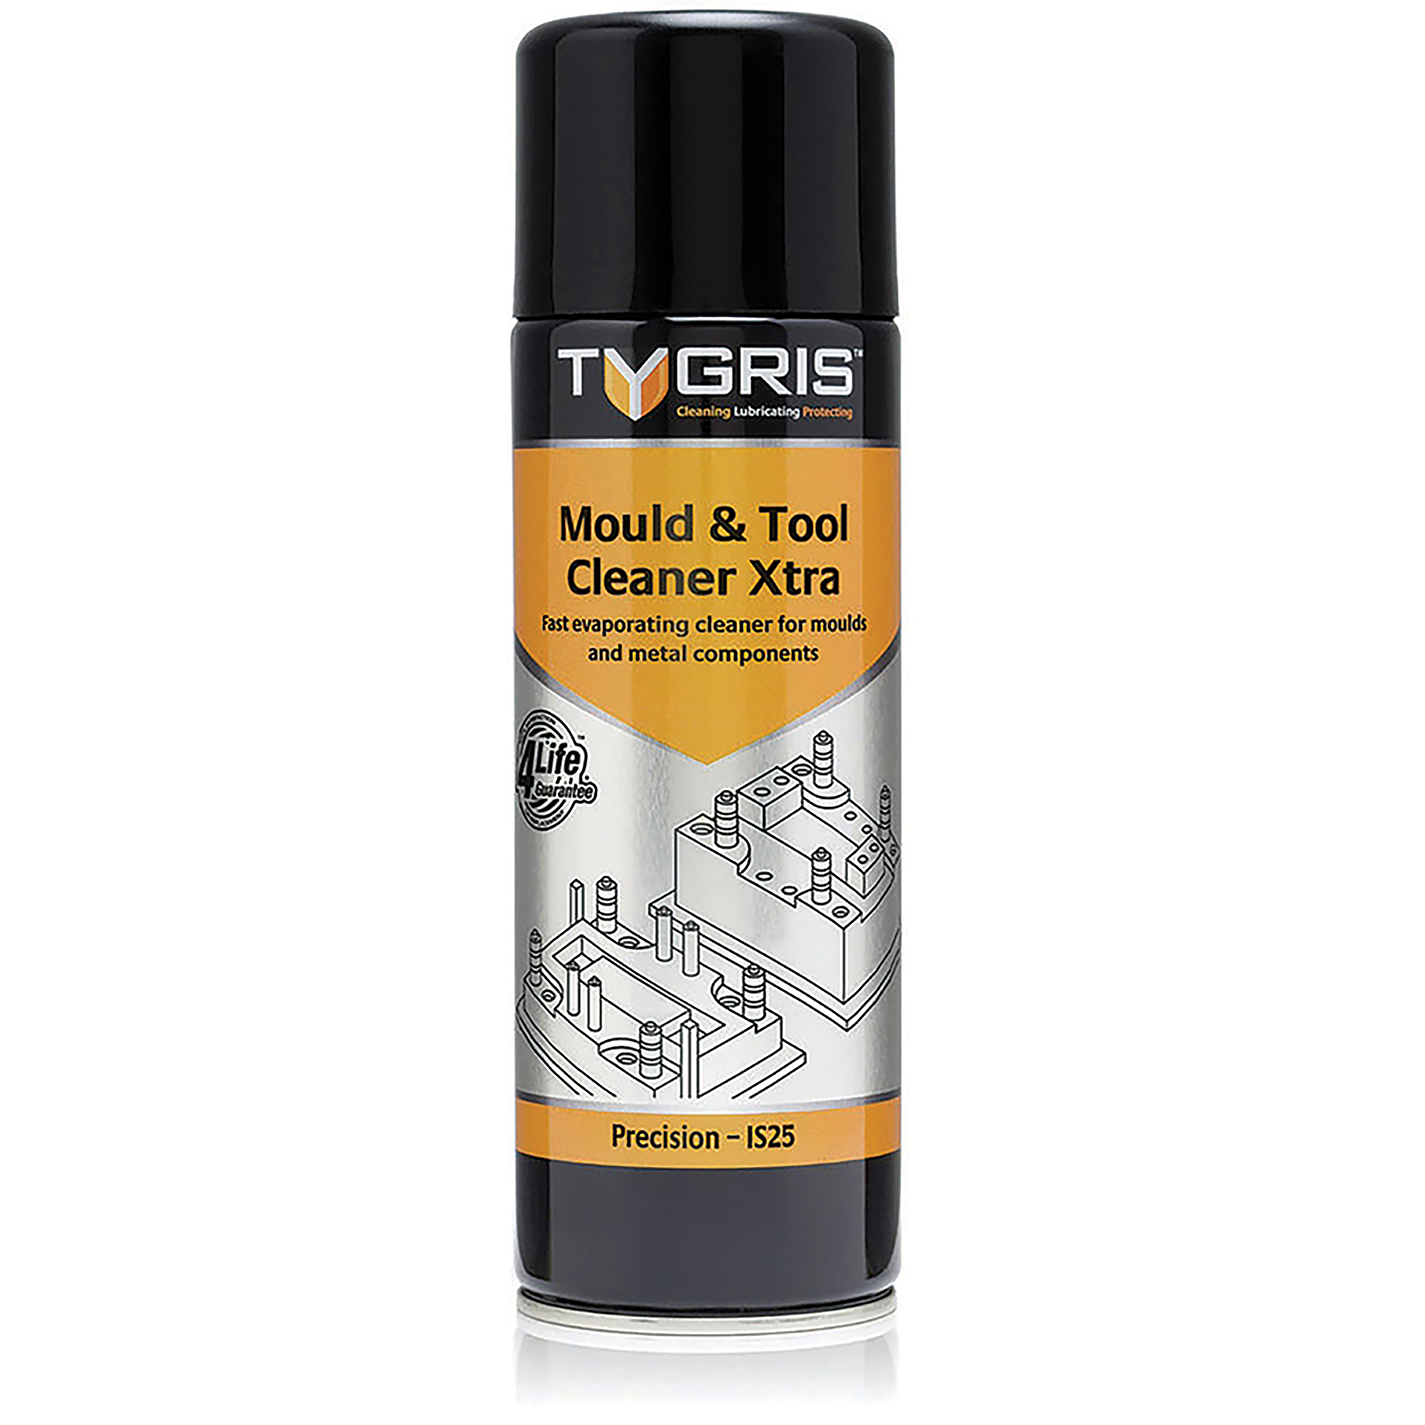 MOULD & TOOL CLEANER XTRA